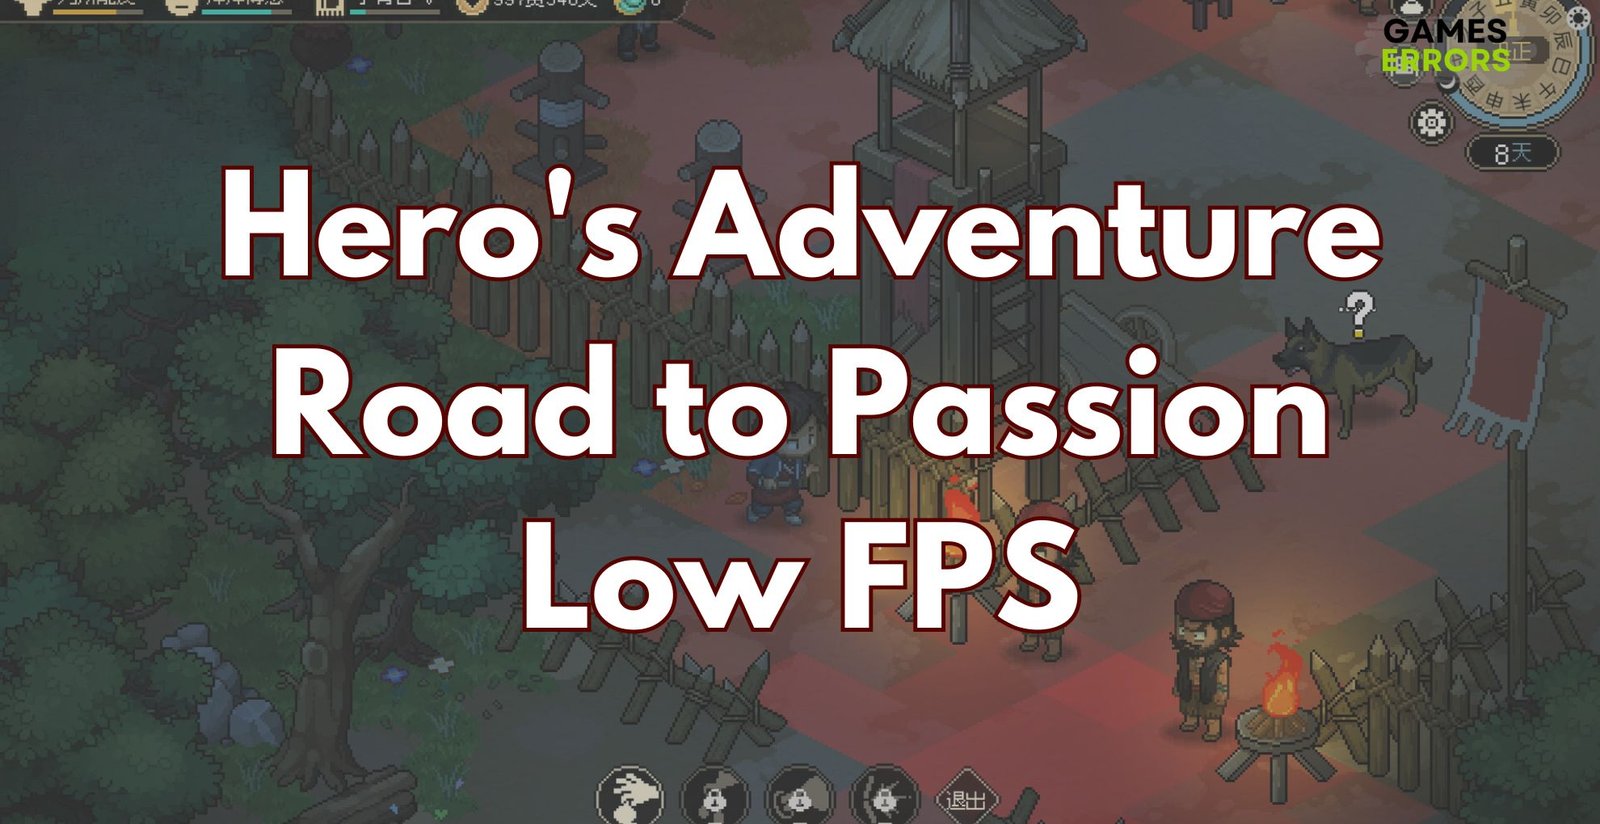 Hero’s Adventure Road to Passion Low FPS: Fix It Quickly